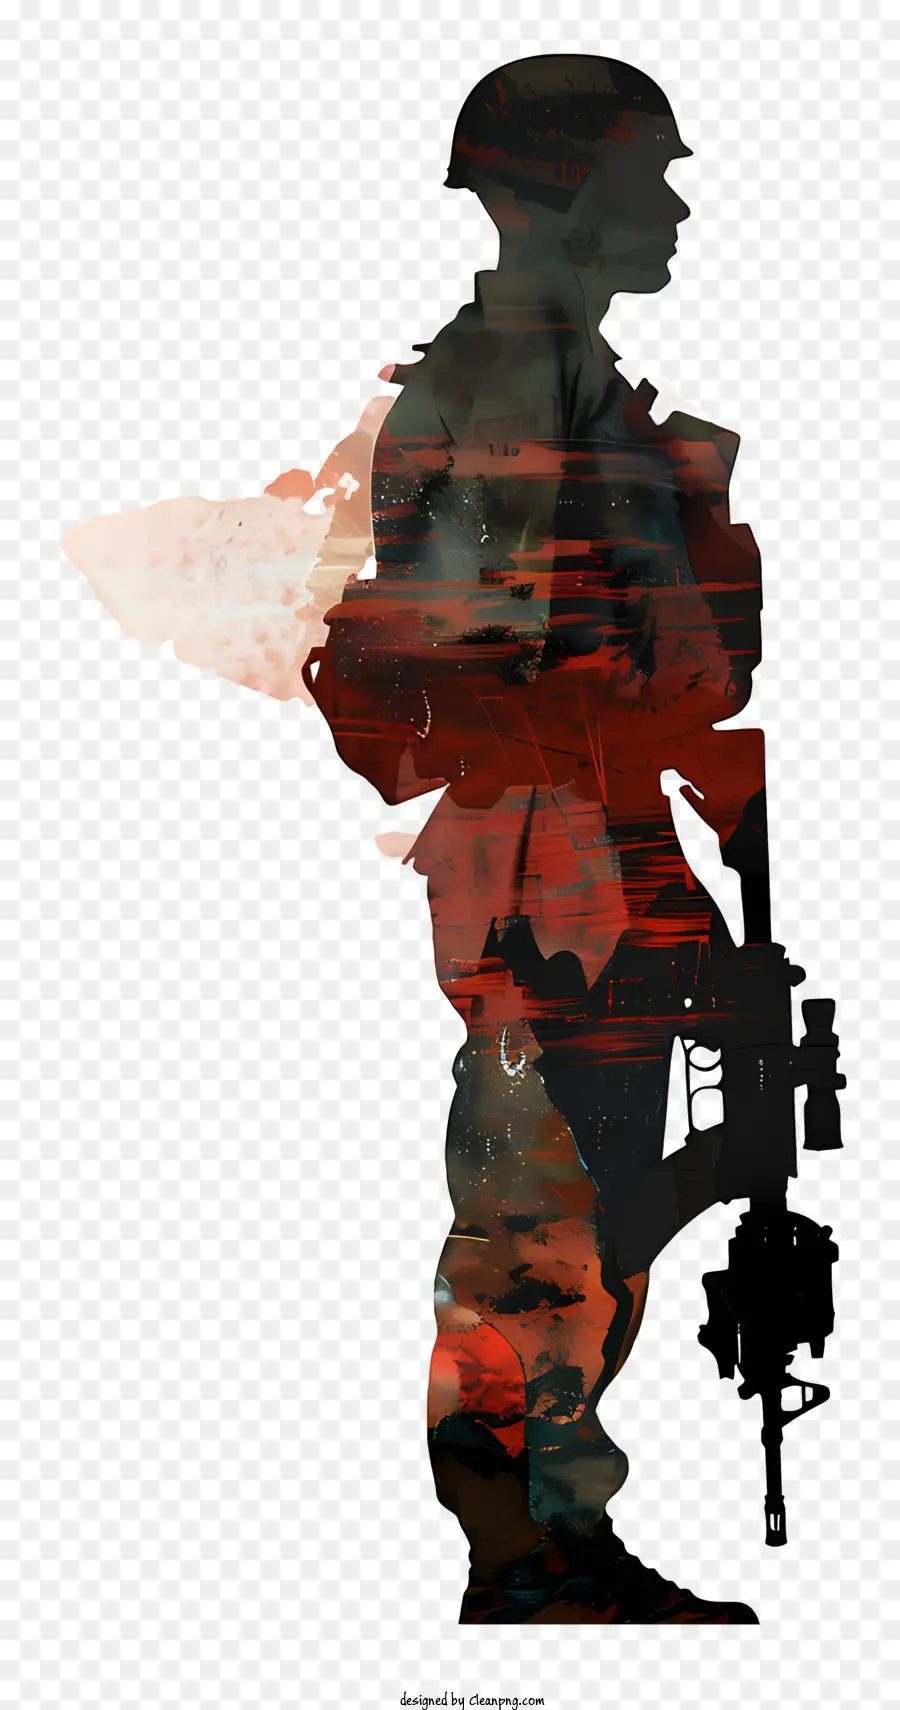 soldier silhouette